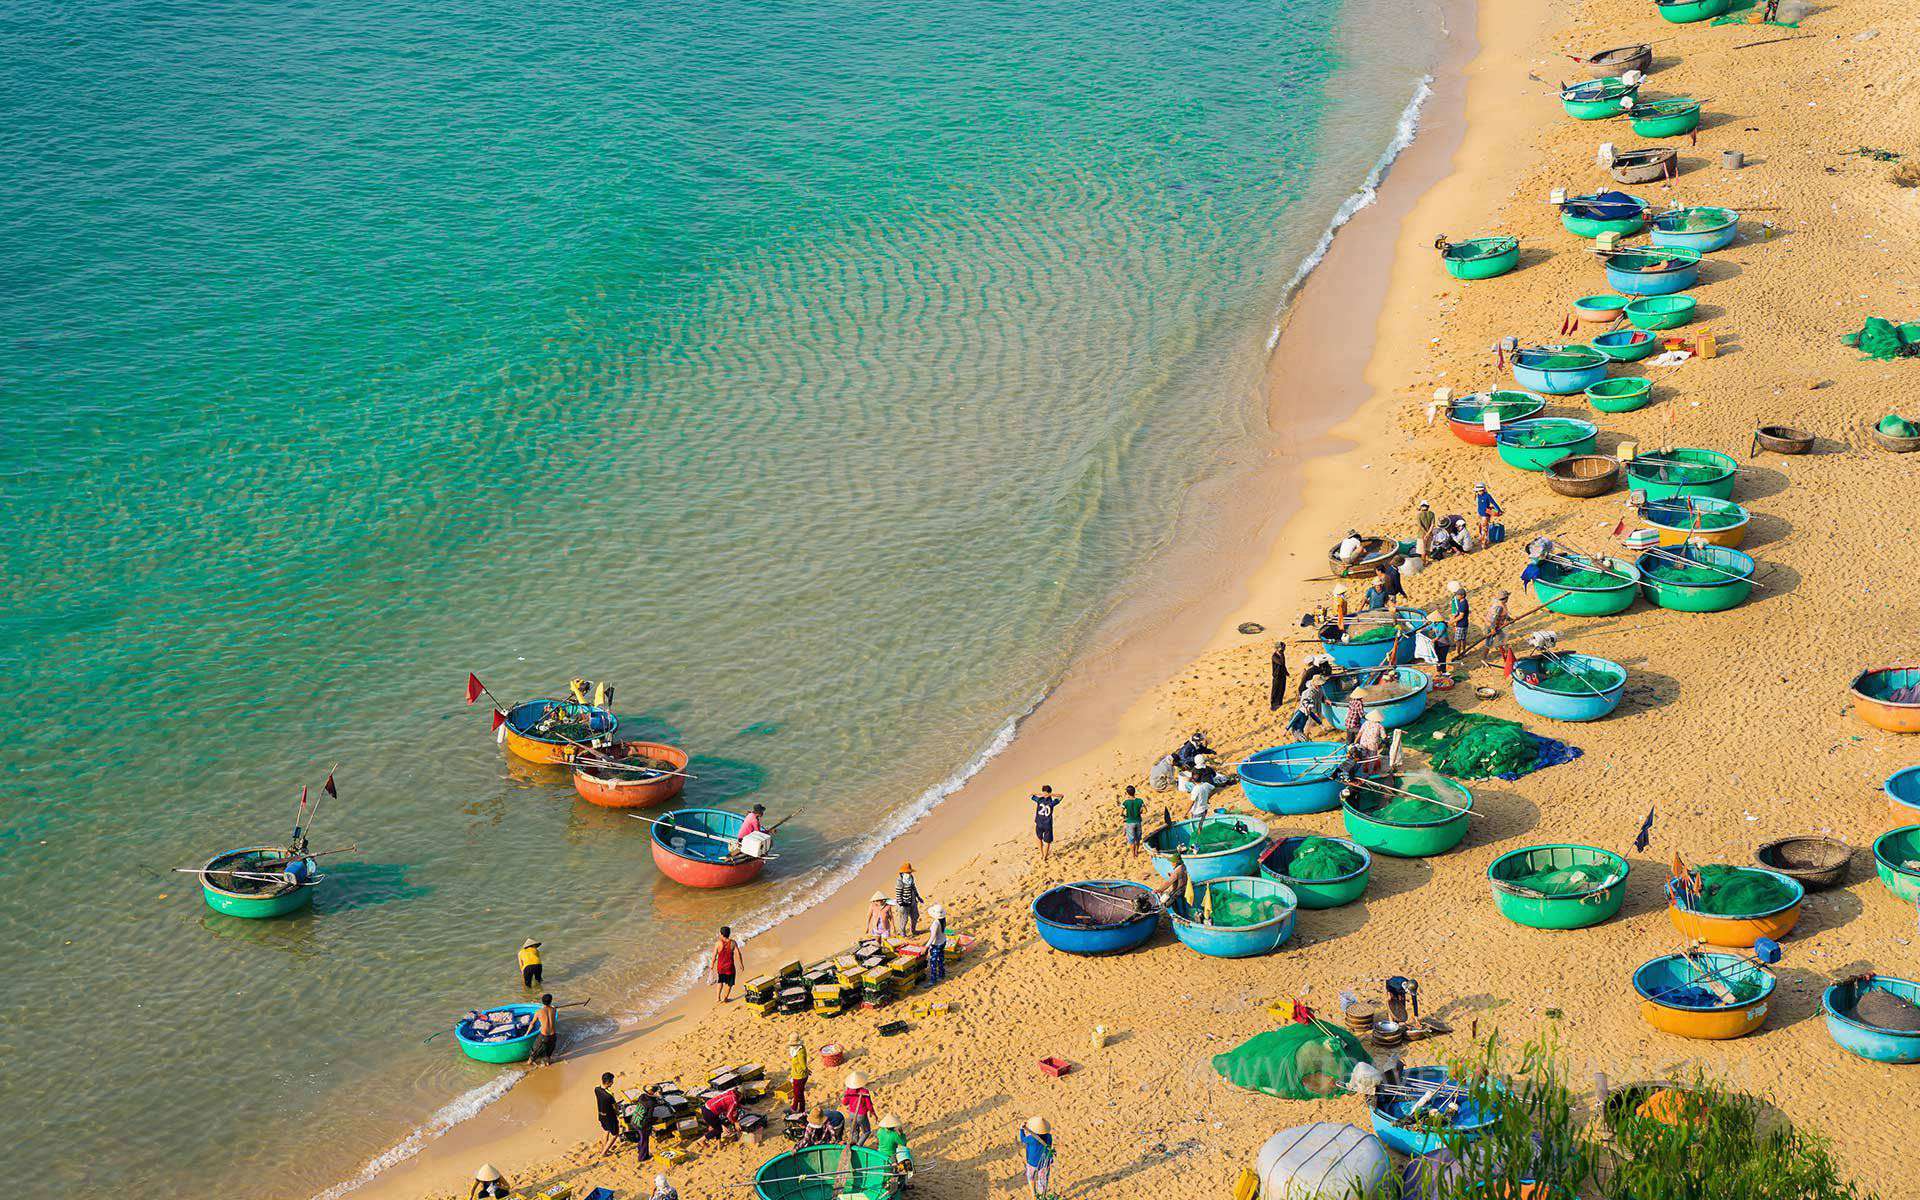 A beach vacation in Quy Nhon